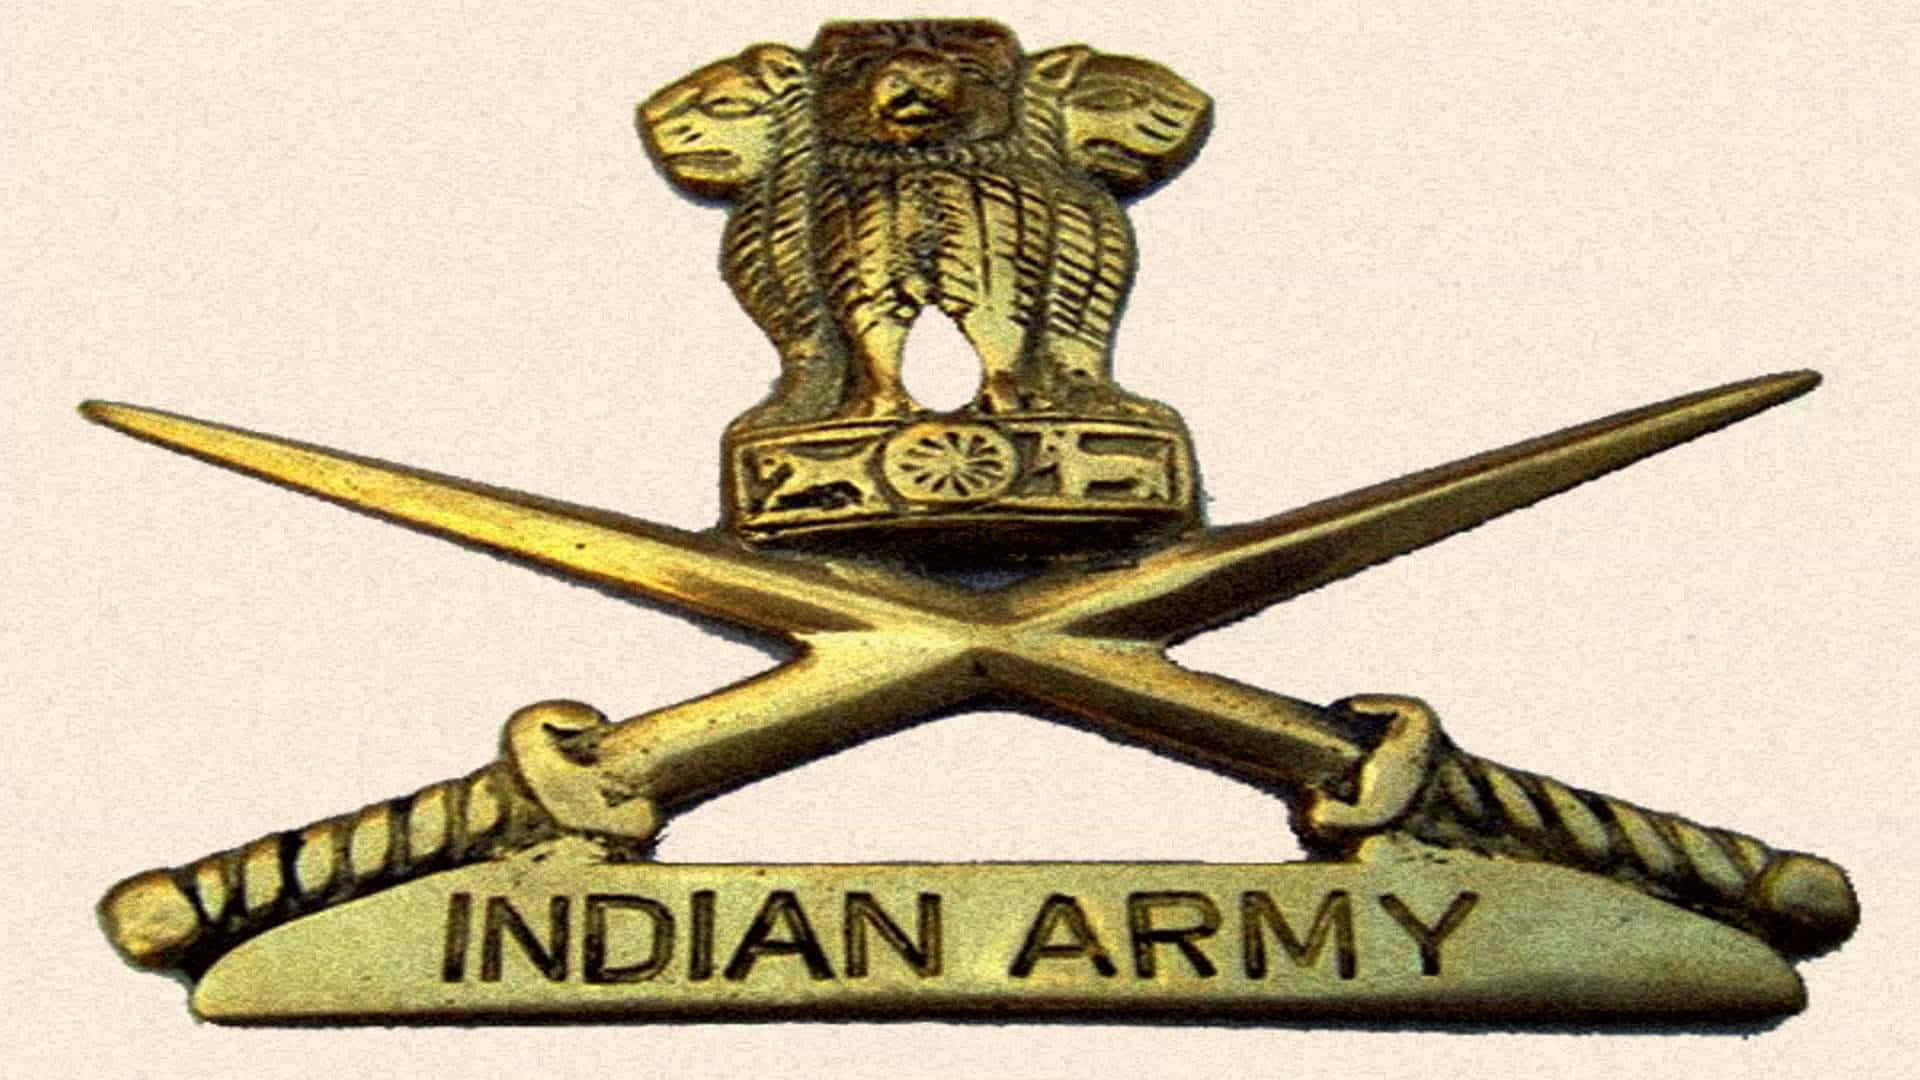 Saluting the Courage and Duty of the Indian Army